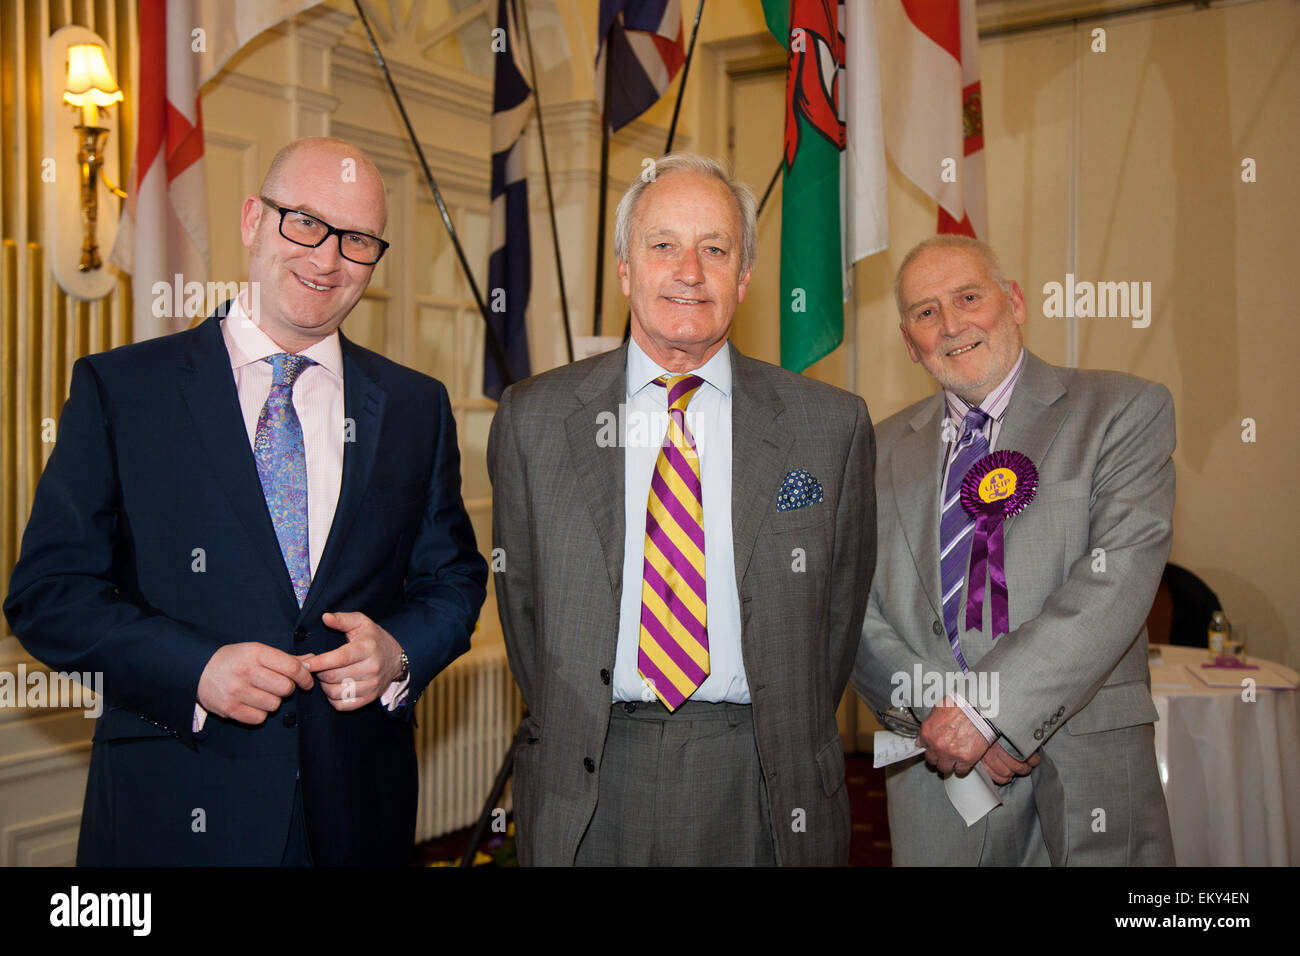 Southport, Merseyside, UK. 14th April, 2015. Paul Nuttall UKIP MEP for North West England, UKIP Deputy leader, with Ukip's parliamentary candidate for Southport, Terry Durrance Leader & Neil Hamilton, UKIP Deputy Chairman addressing a members pre-election meeting held in the Royal Clifton Hotel. Credit:  Mar Photographics/Alamy Live News Stock Photo